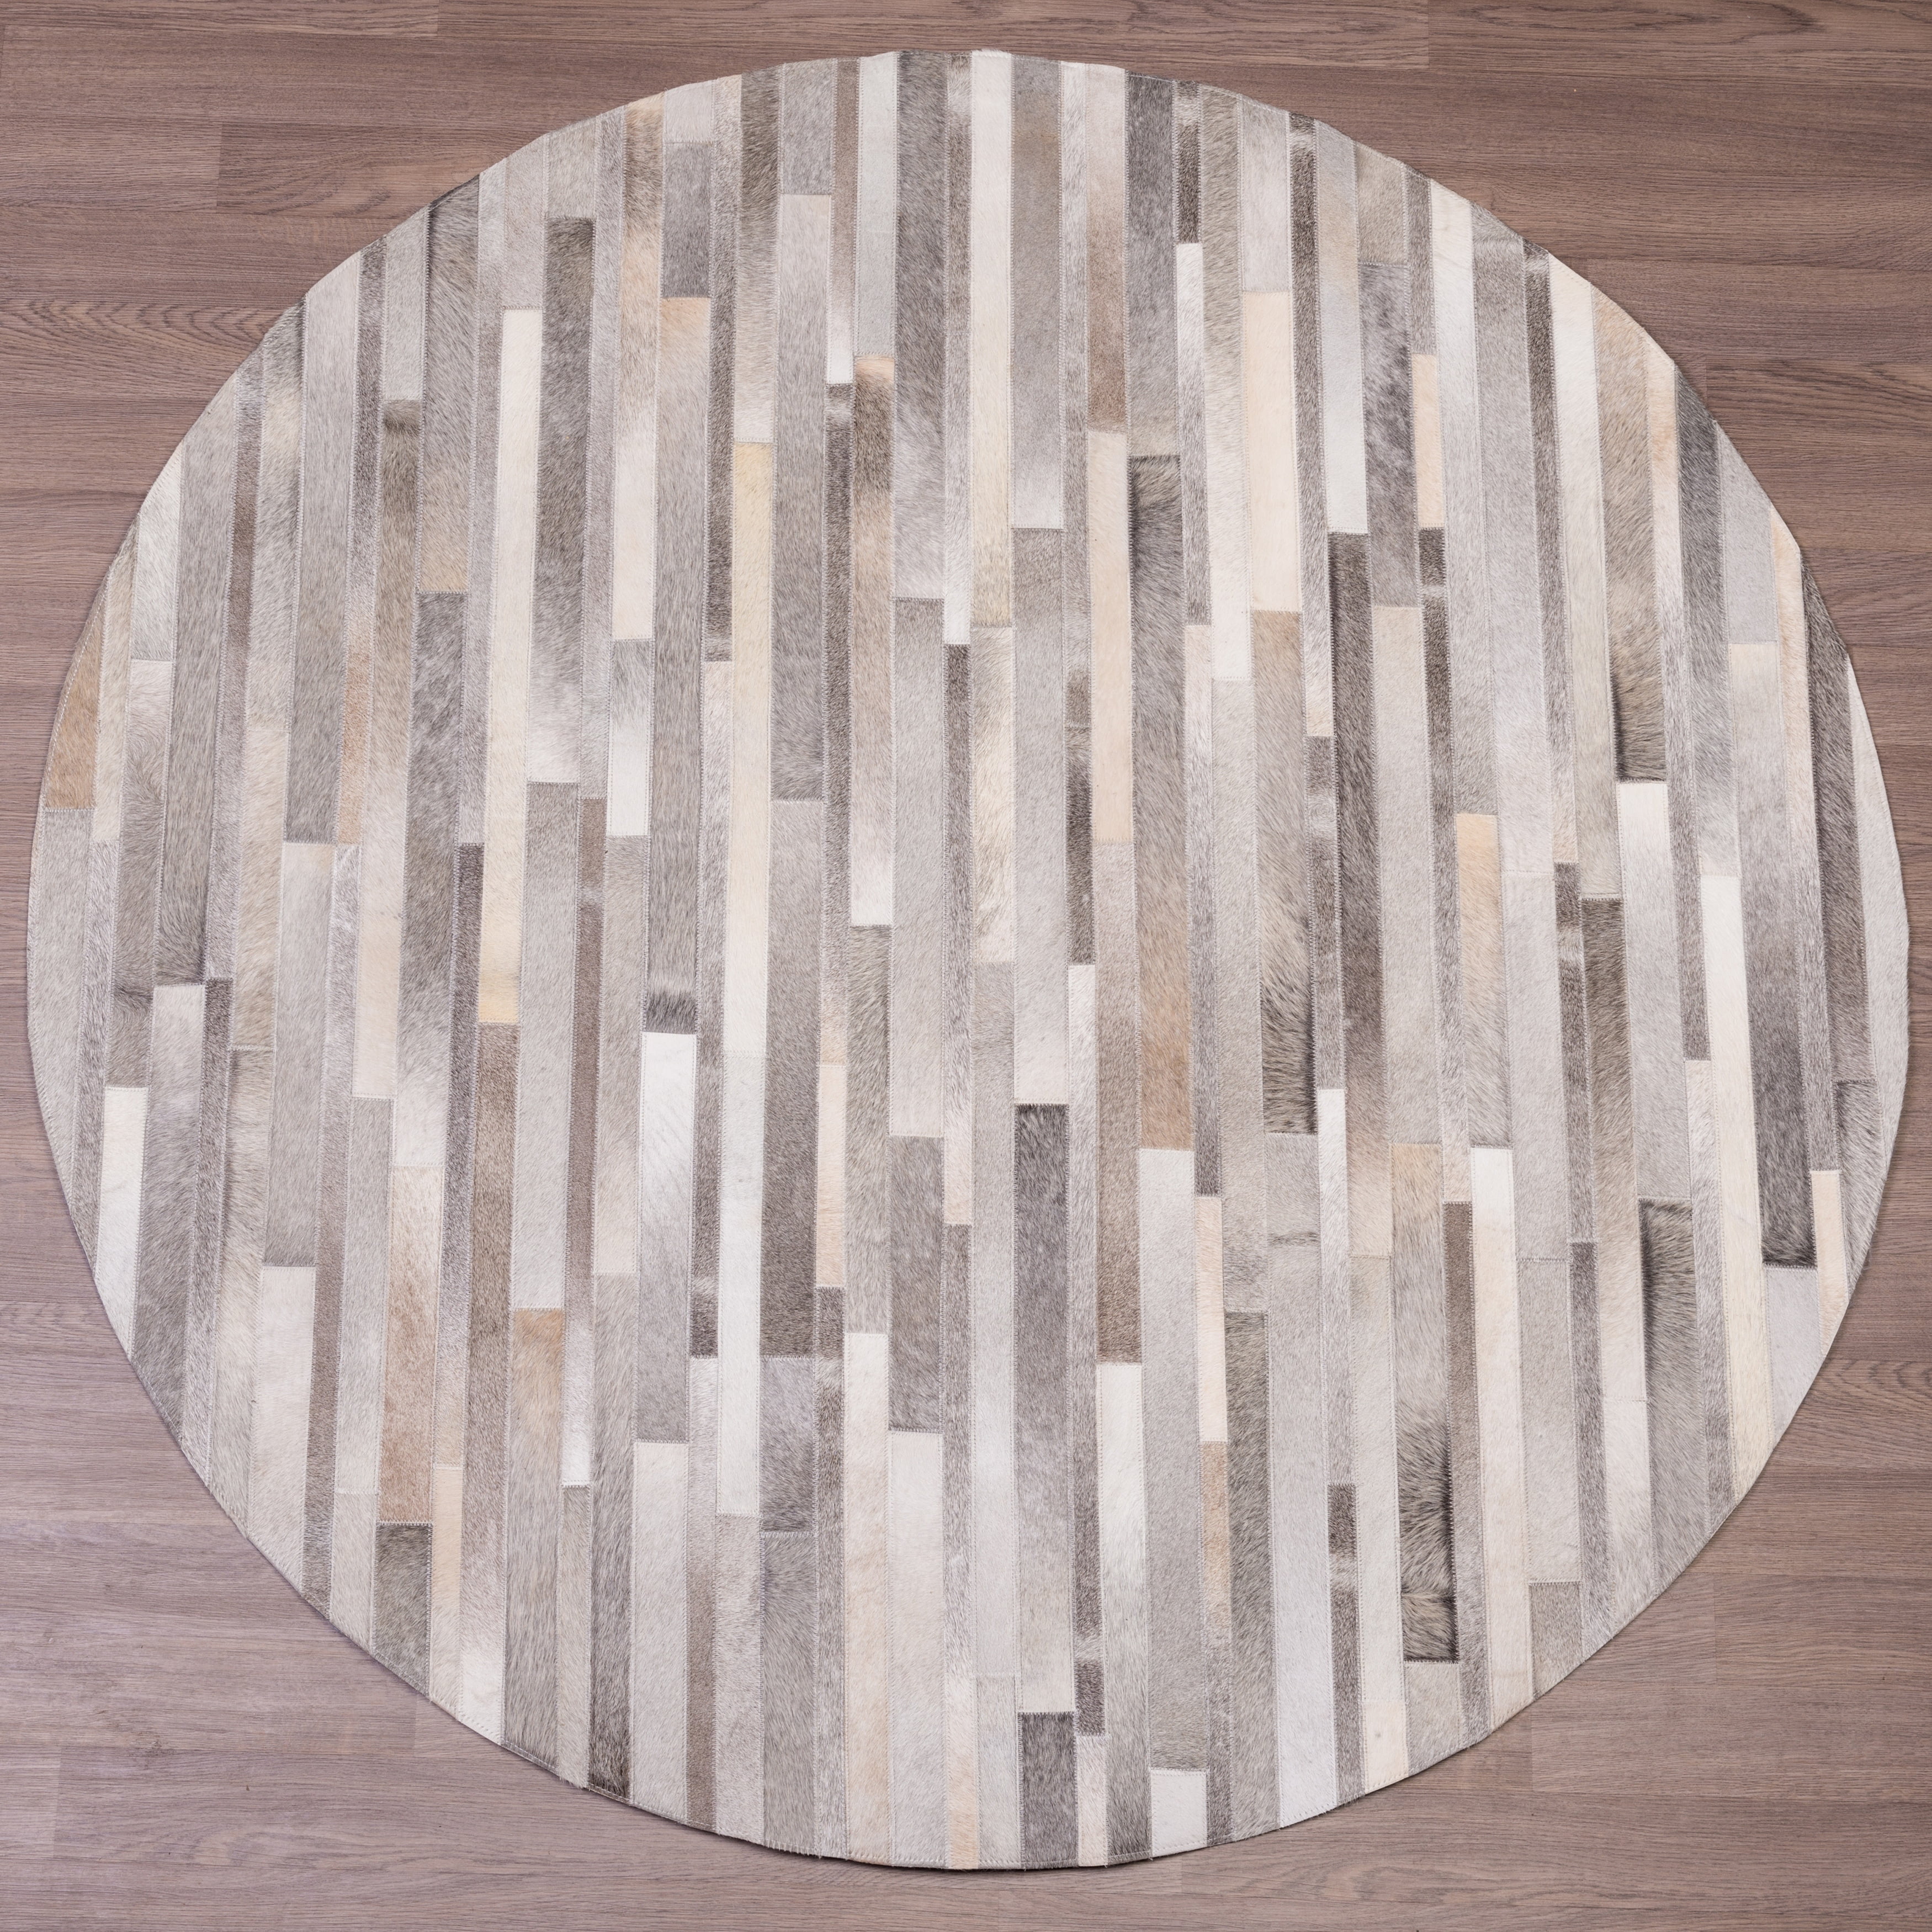 Hand Stitched Grey Cow Hide Leather, Round Leather Rug